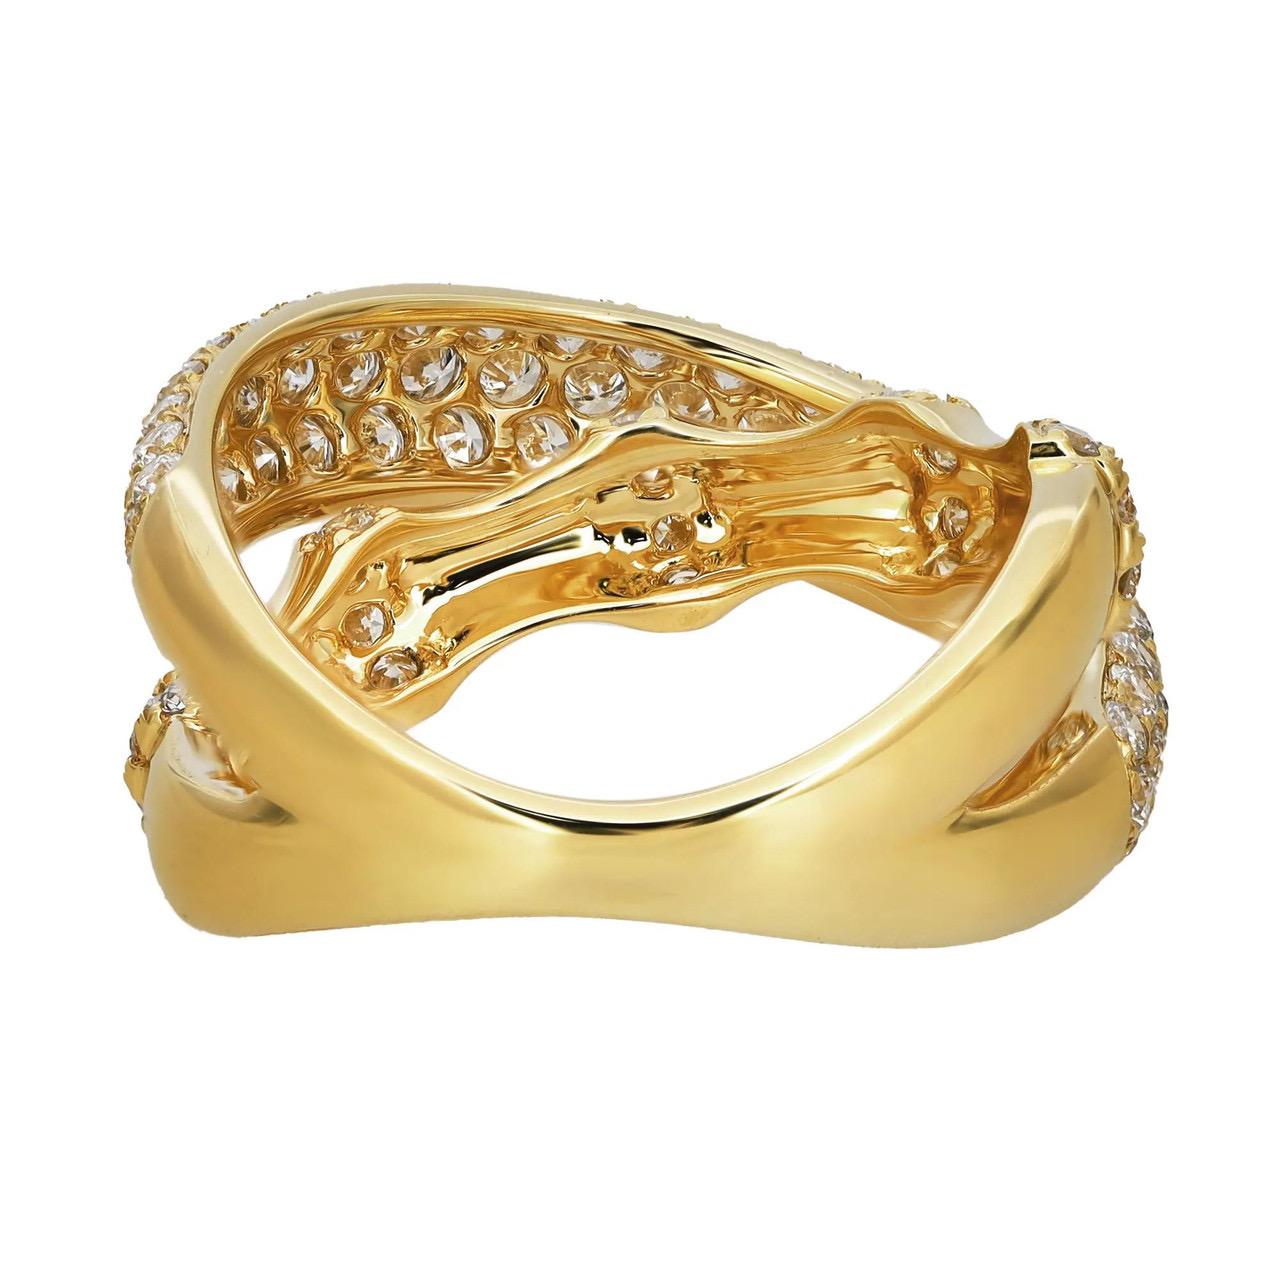 For Sale:  Elizabeth Fine Jewelry 1.71 Carat Diamond Crossover Ring in 18K Yellow Gold  3